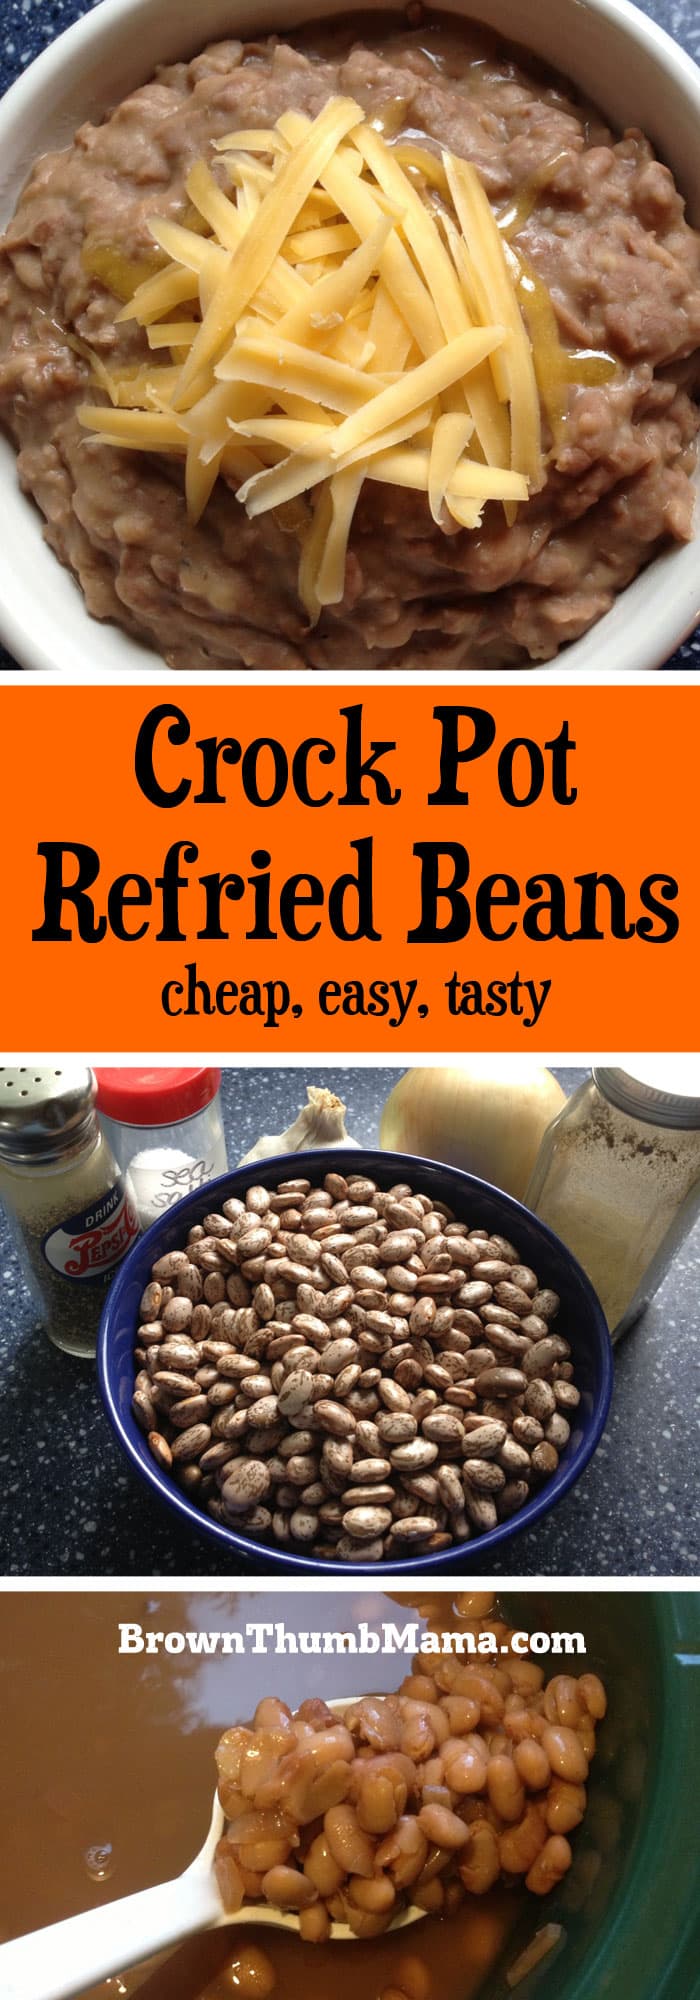 Let your Crock Pot do the cooking! Make delicious, nutritious, refried beans in your slow cooker--with your choice of spices and seasonings.